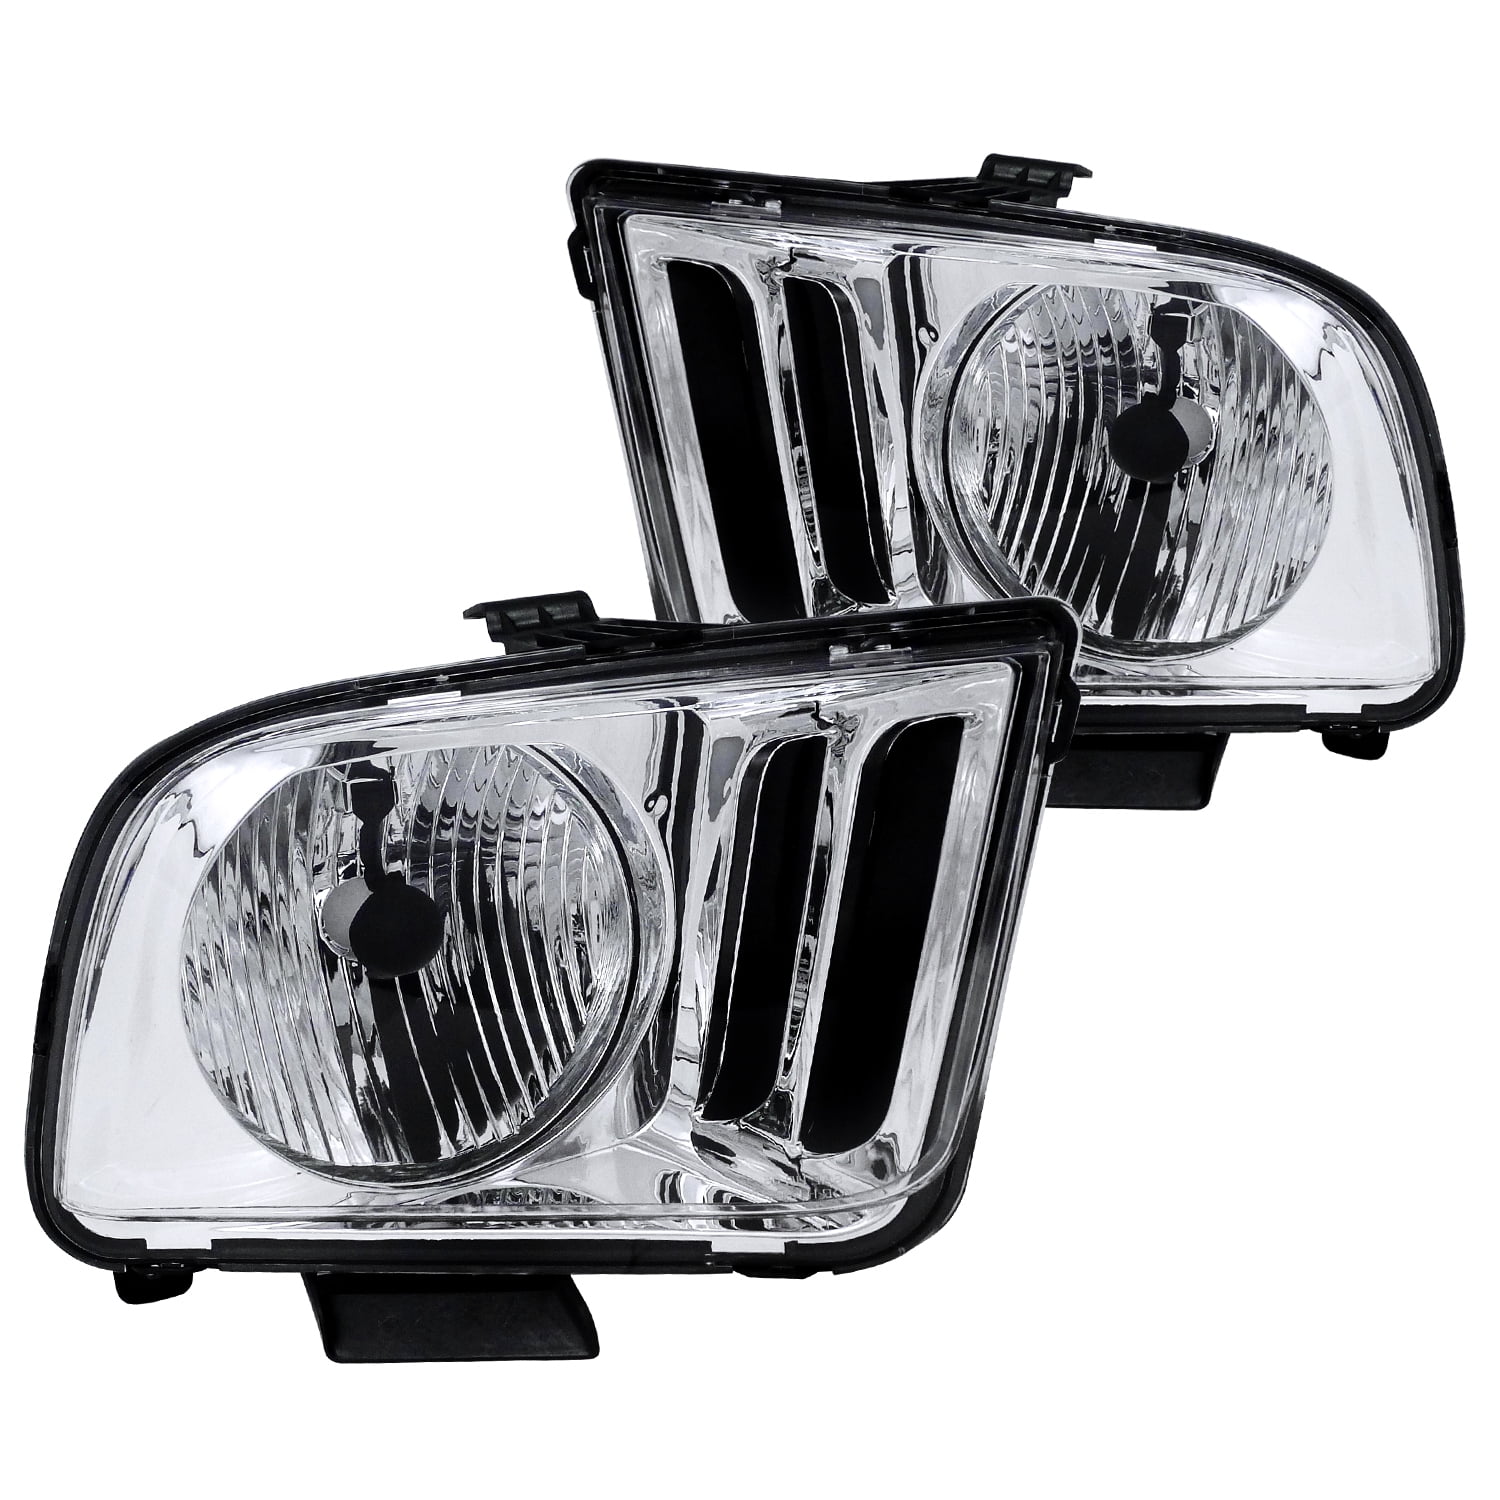 Fits 2005-09 FORD MUSTANG SIGNAL LIGHT/LAMP  Pair Left and Right Set